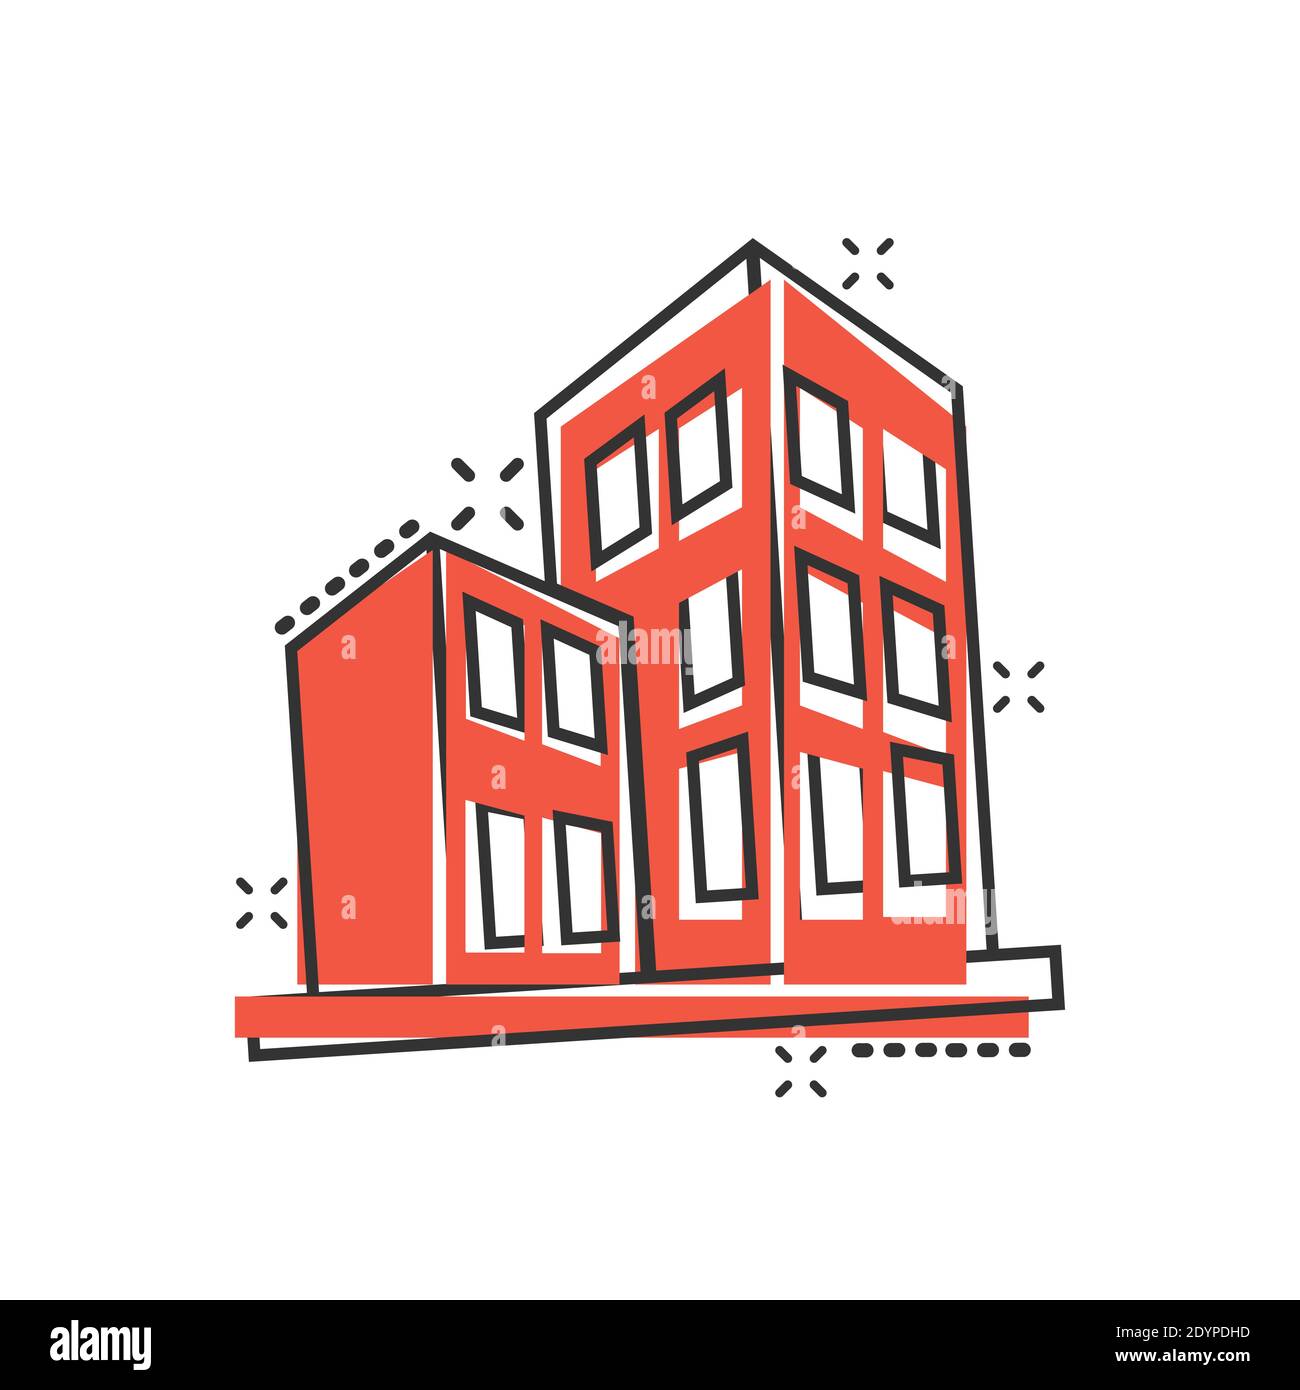 Building icon in comic style. Skyscraper cartoon vector illustration on white isolated background. Architecture splash effect business concept. Stock Vector